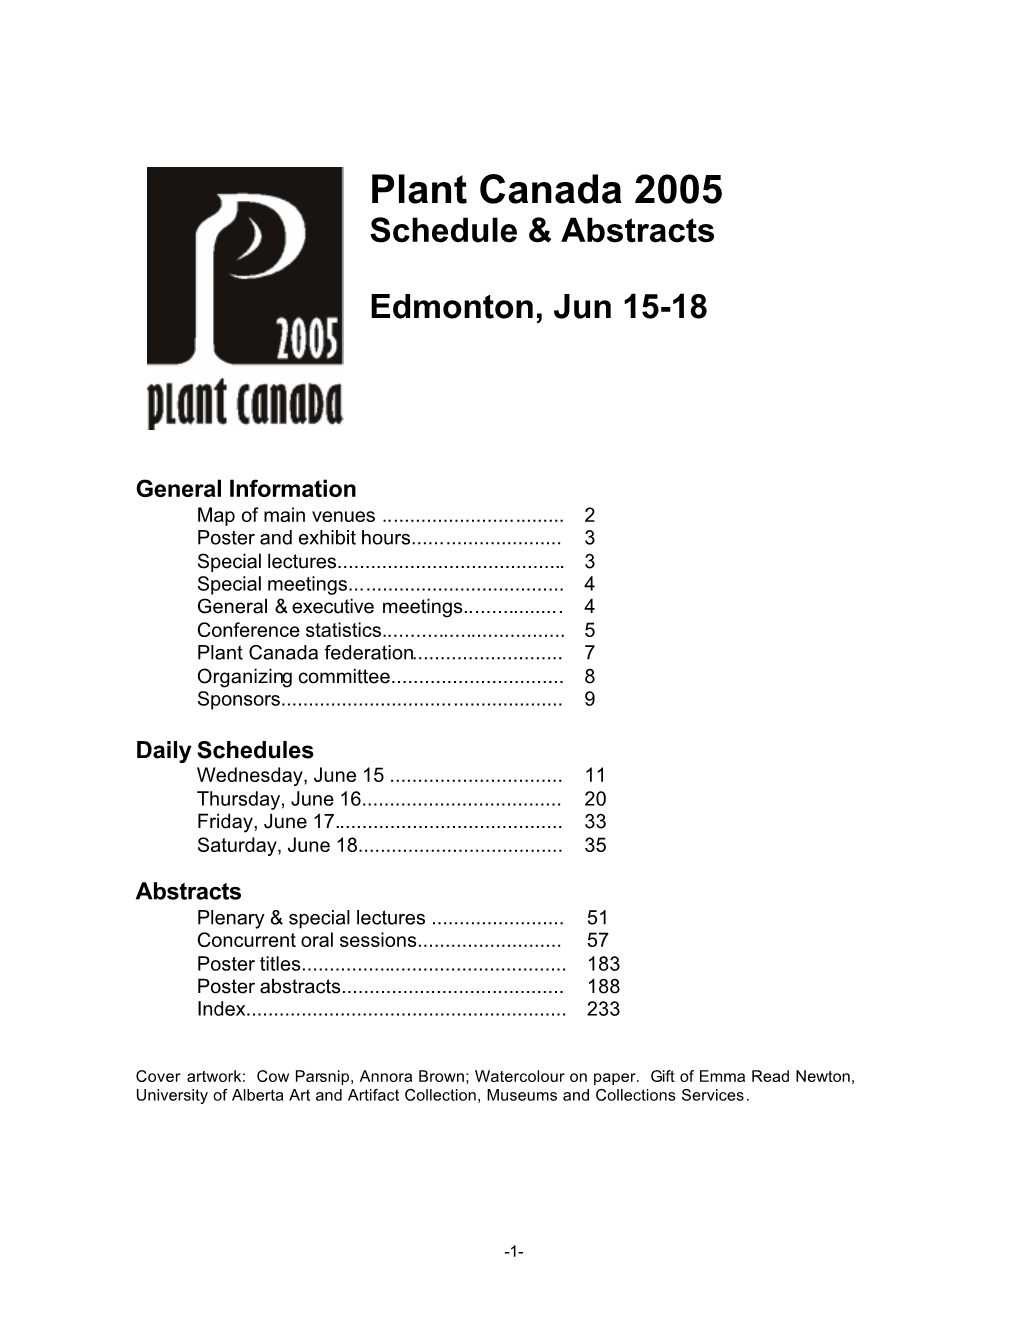 Plant Canada 2005 Schedule & Abstracts